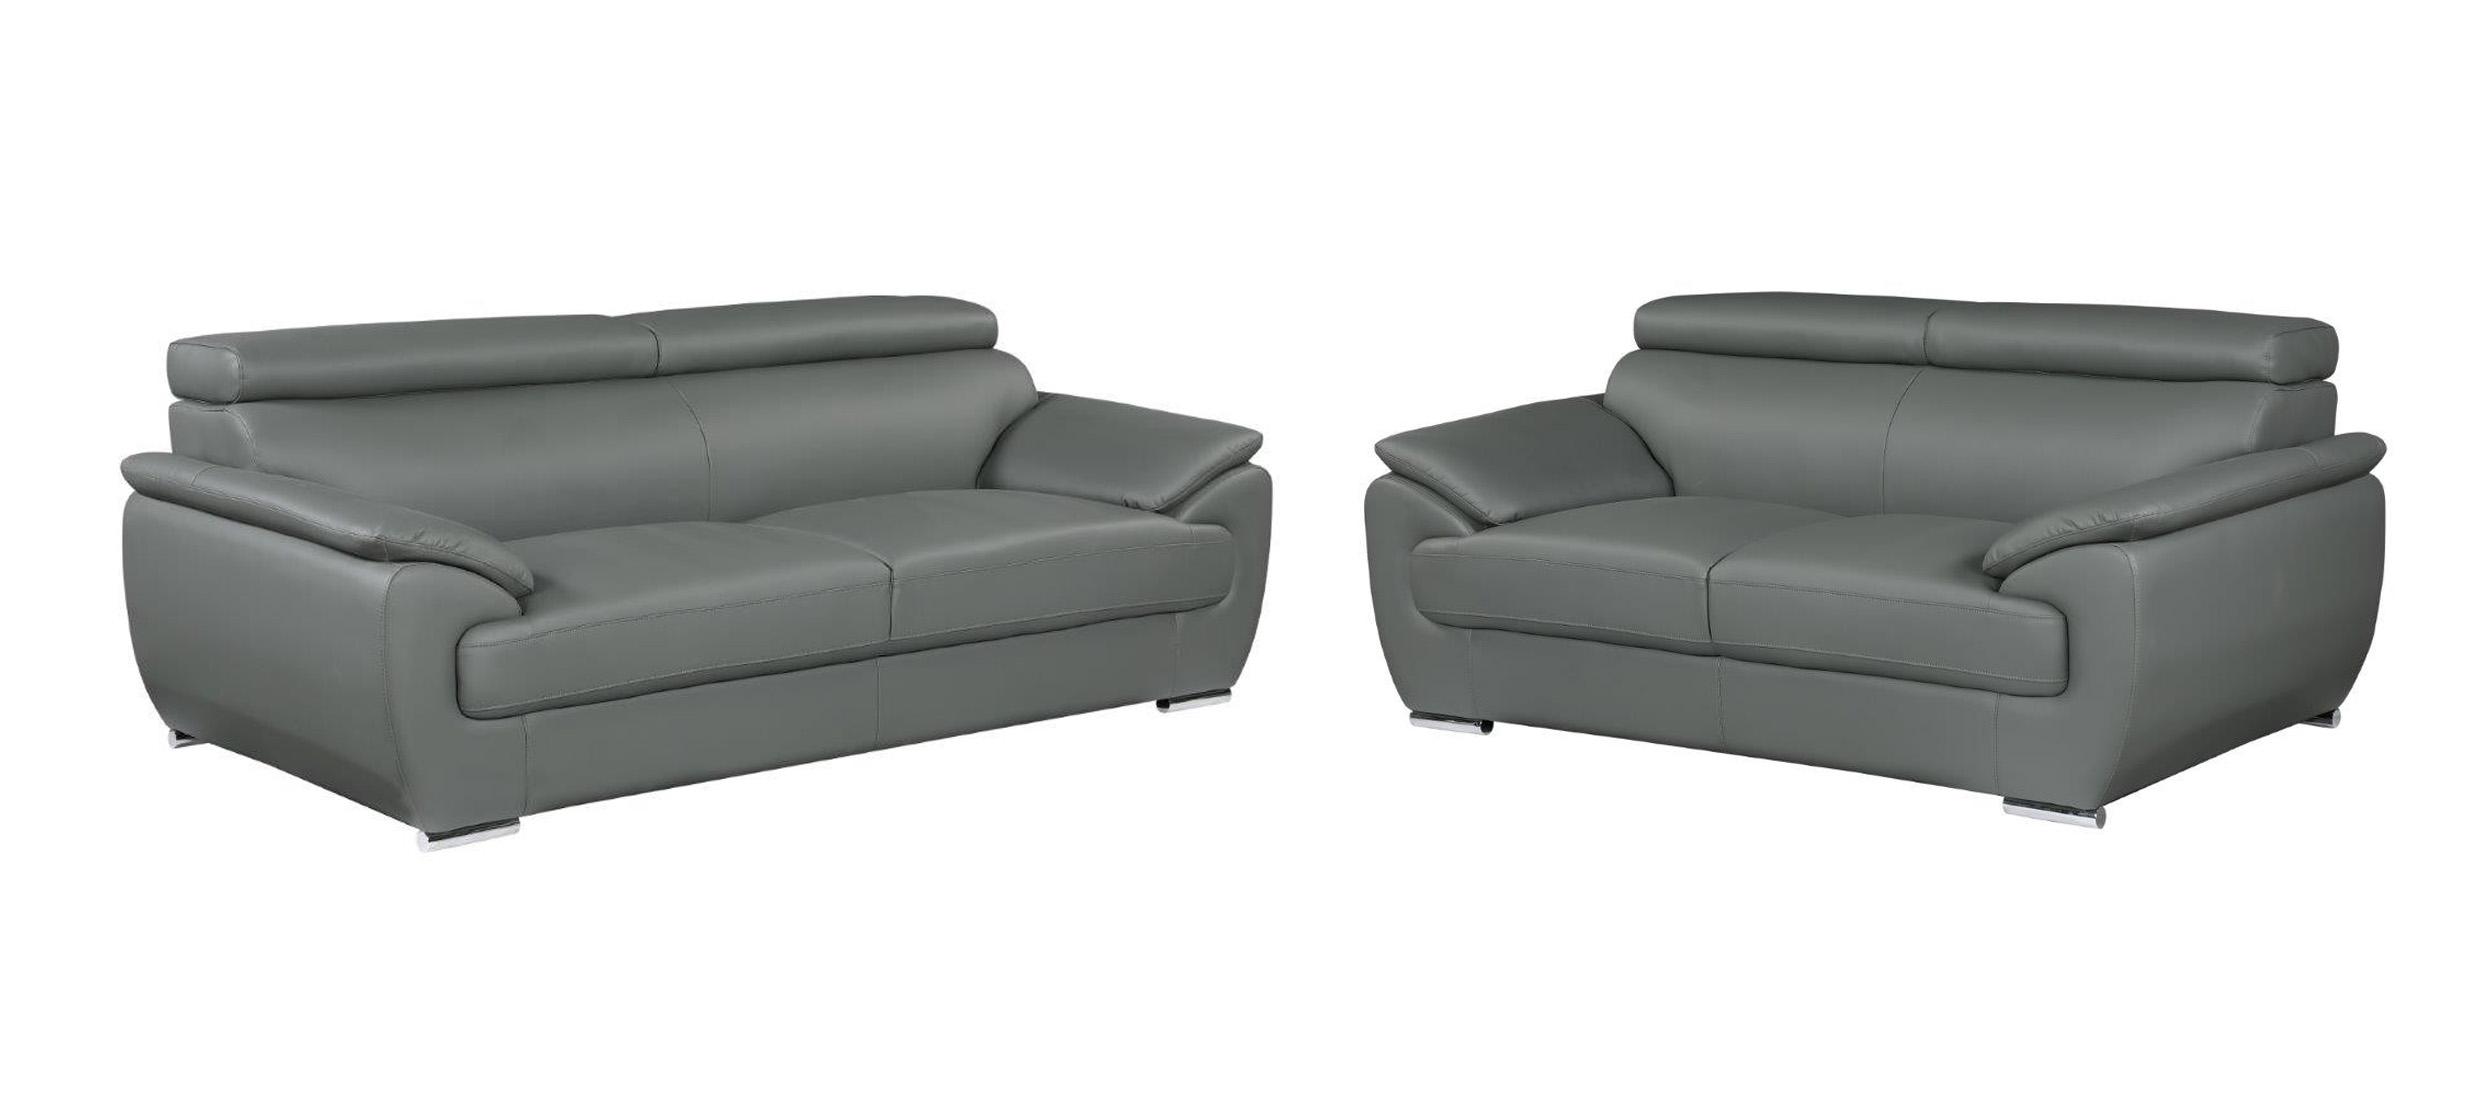 Contemporary Sofa and Loveseat Set U4571 4571-GRAY-2PC in Gray Leather Match